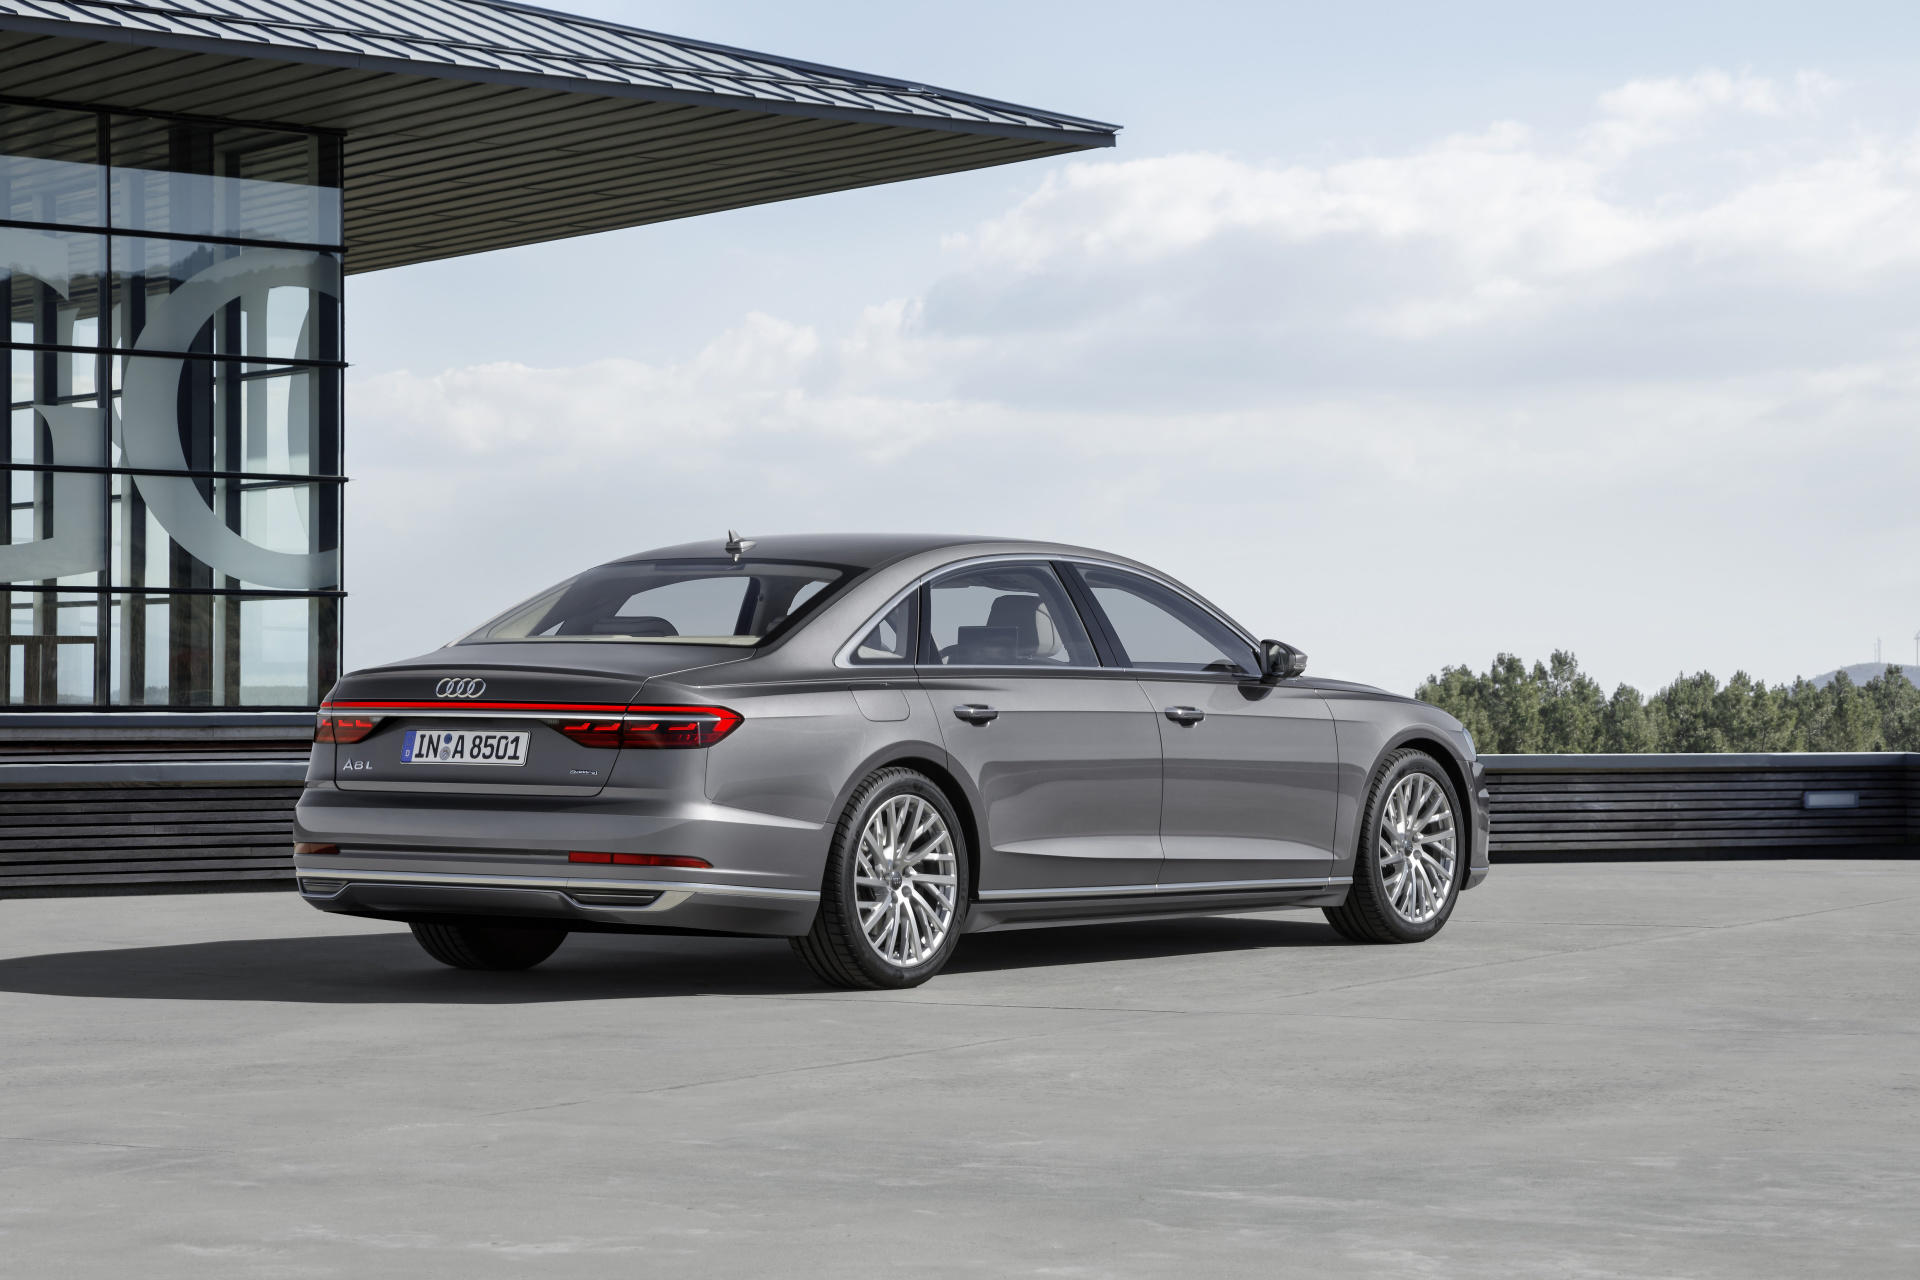 Audi A8, travel with the guarantee of the most advanced technology